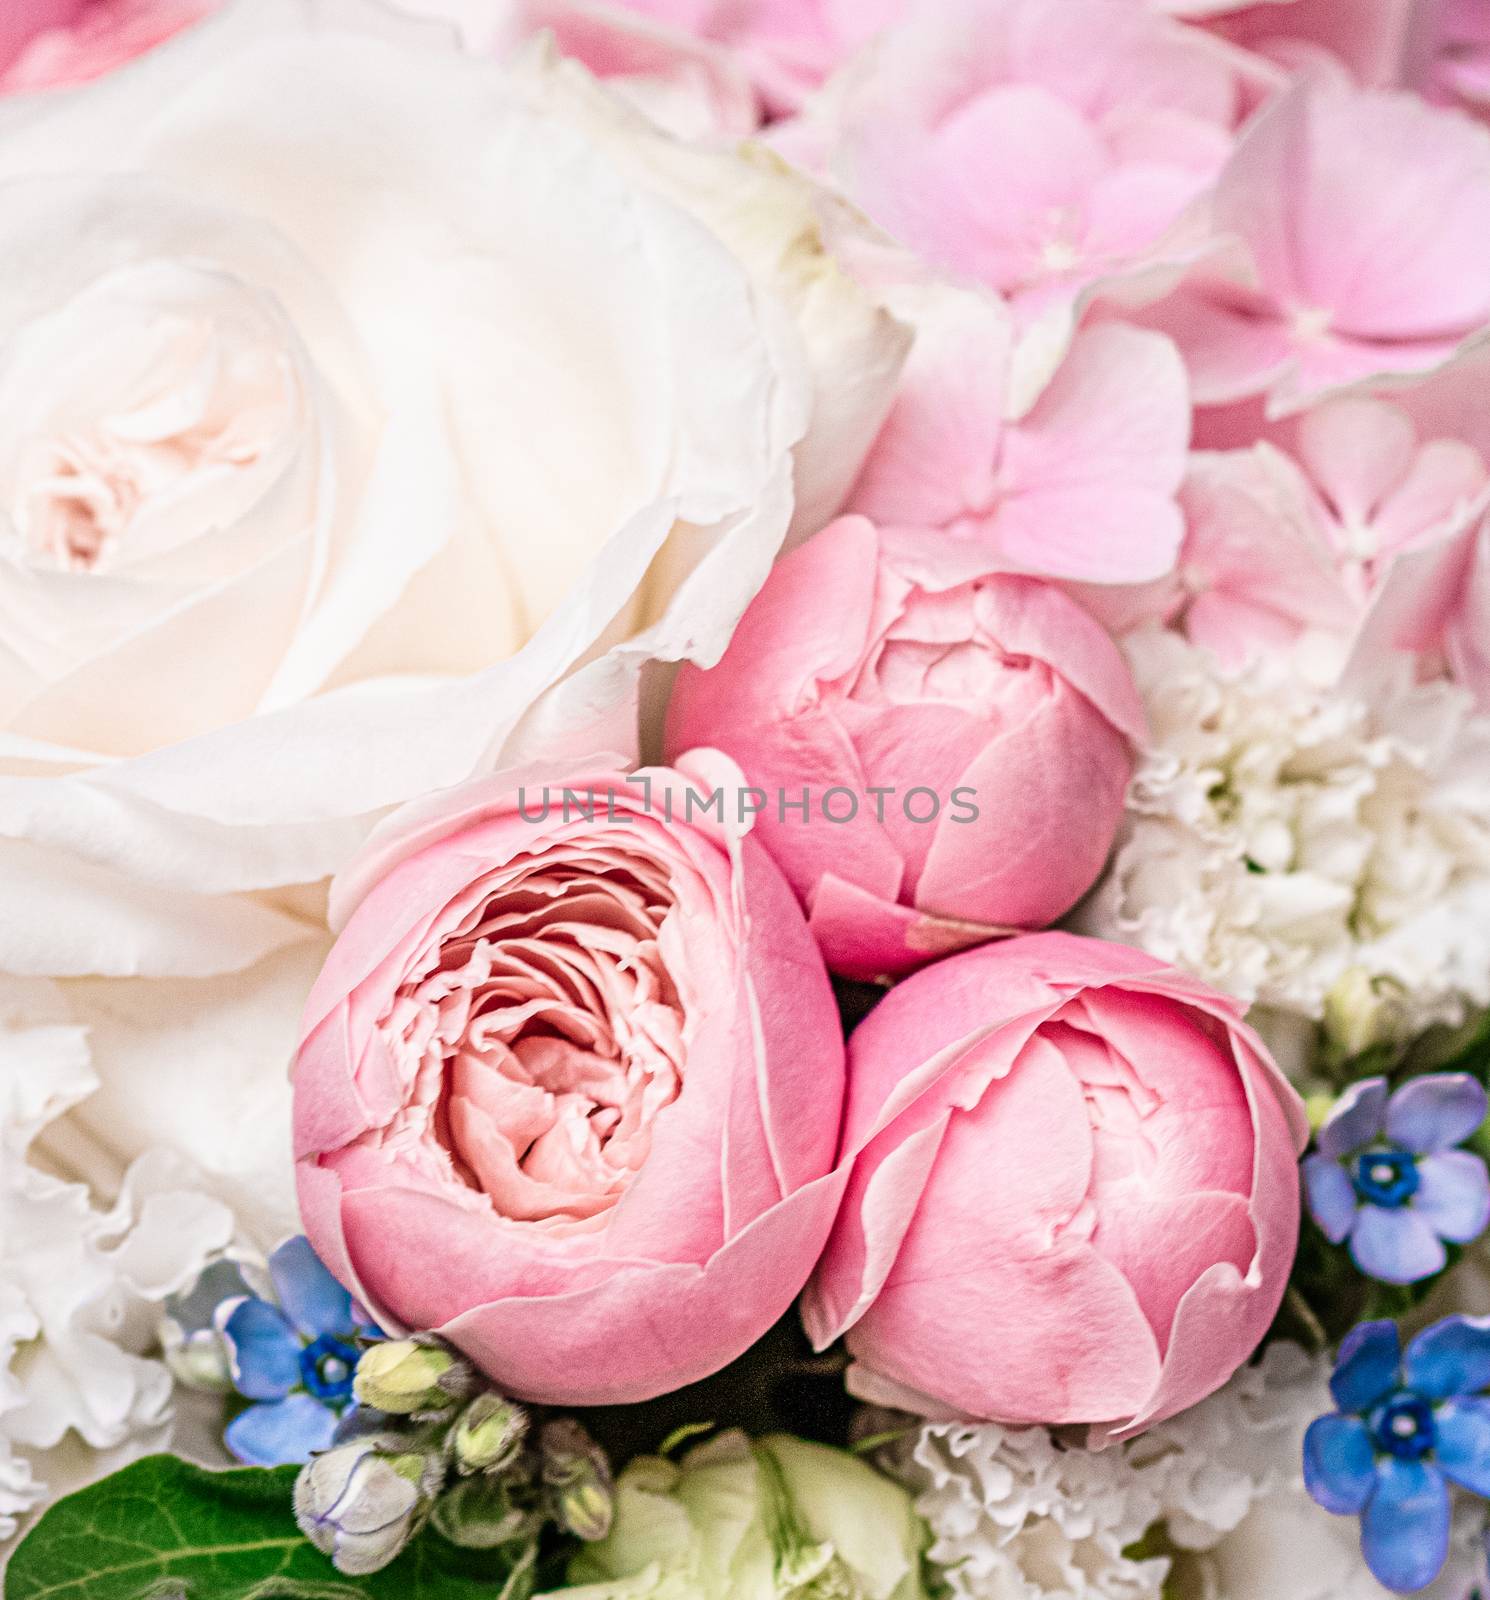 Floral bouquet as gift, rose flowers arrangement at flower shop or online delivery, romantic present and luxury home decoration